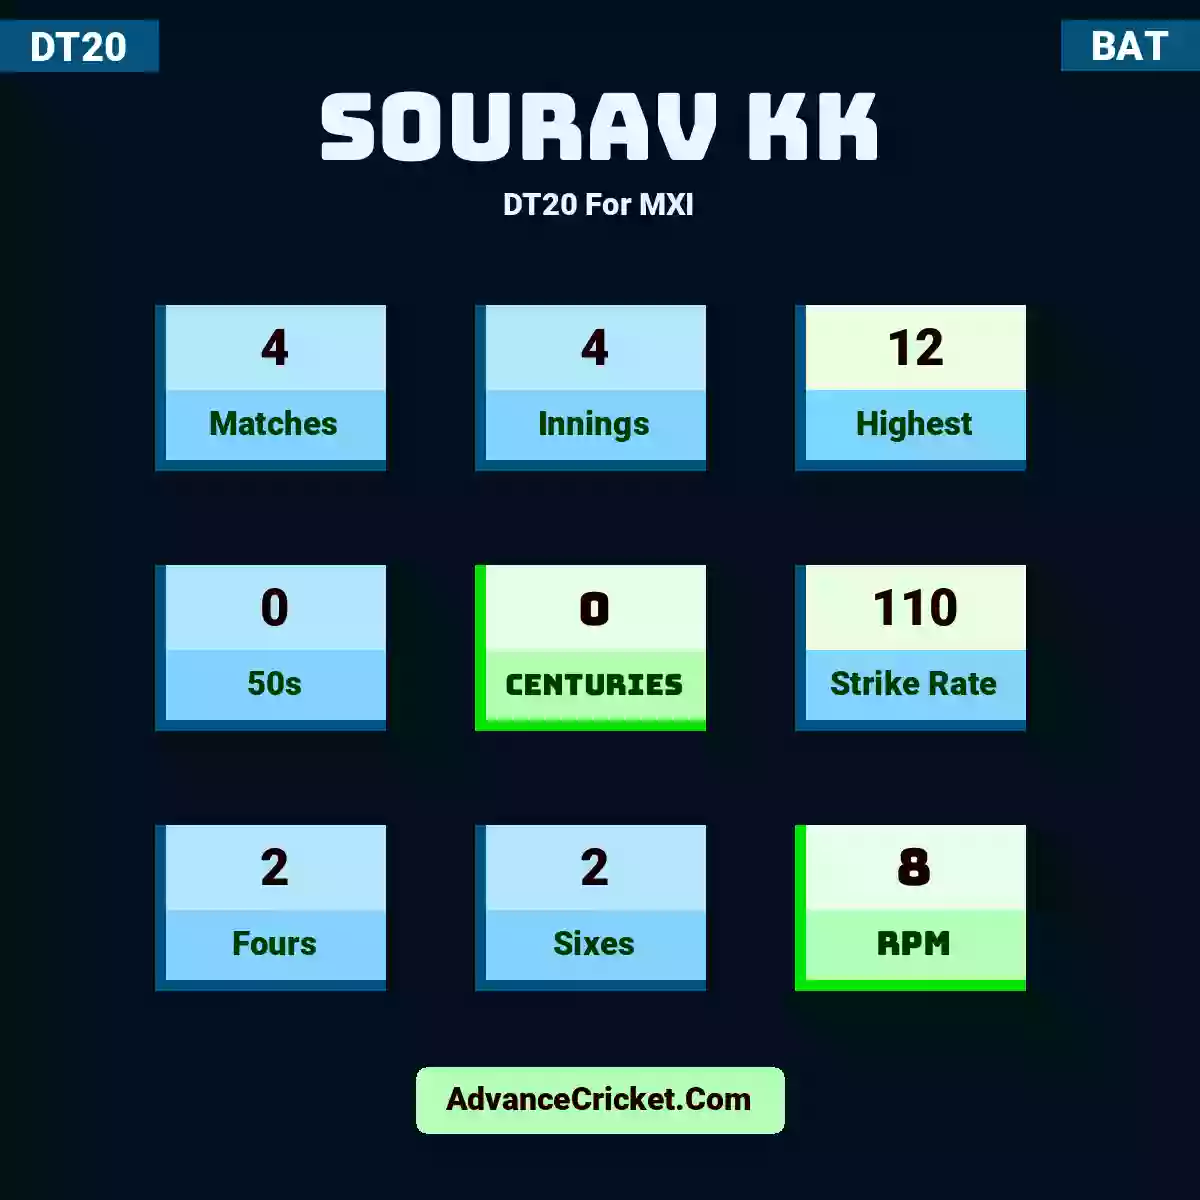 Sourav KK DT20  For MXI, Sourav KK played 4 matches, scored 12 runs as highest, 0 half-centuries, and 0 centuries, with a strike rate of 110. S.KK hit 2 fours and 2 sixes, with an RPM of 8.